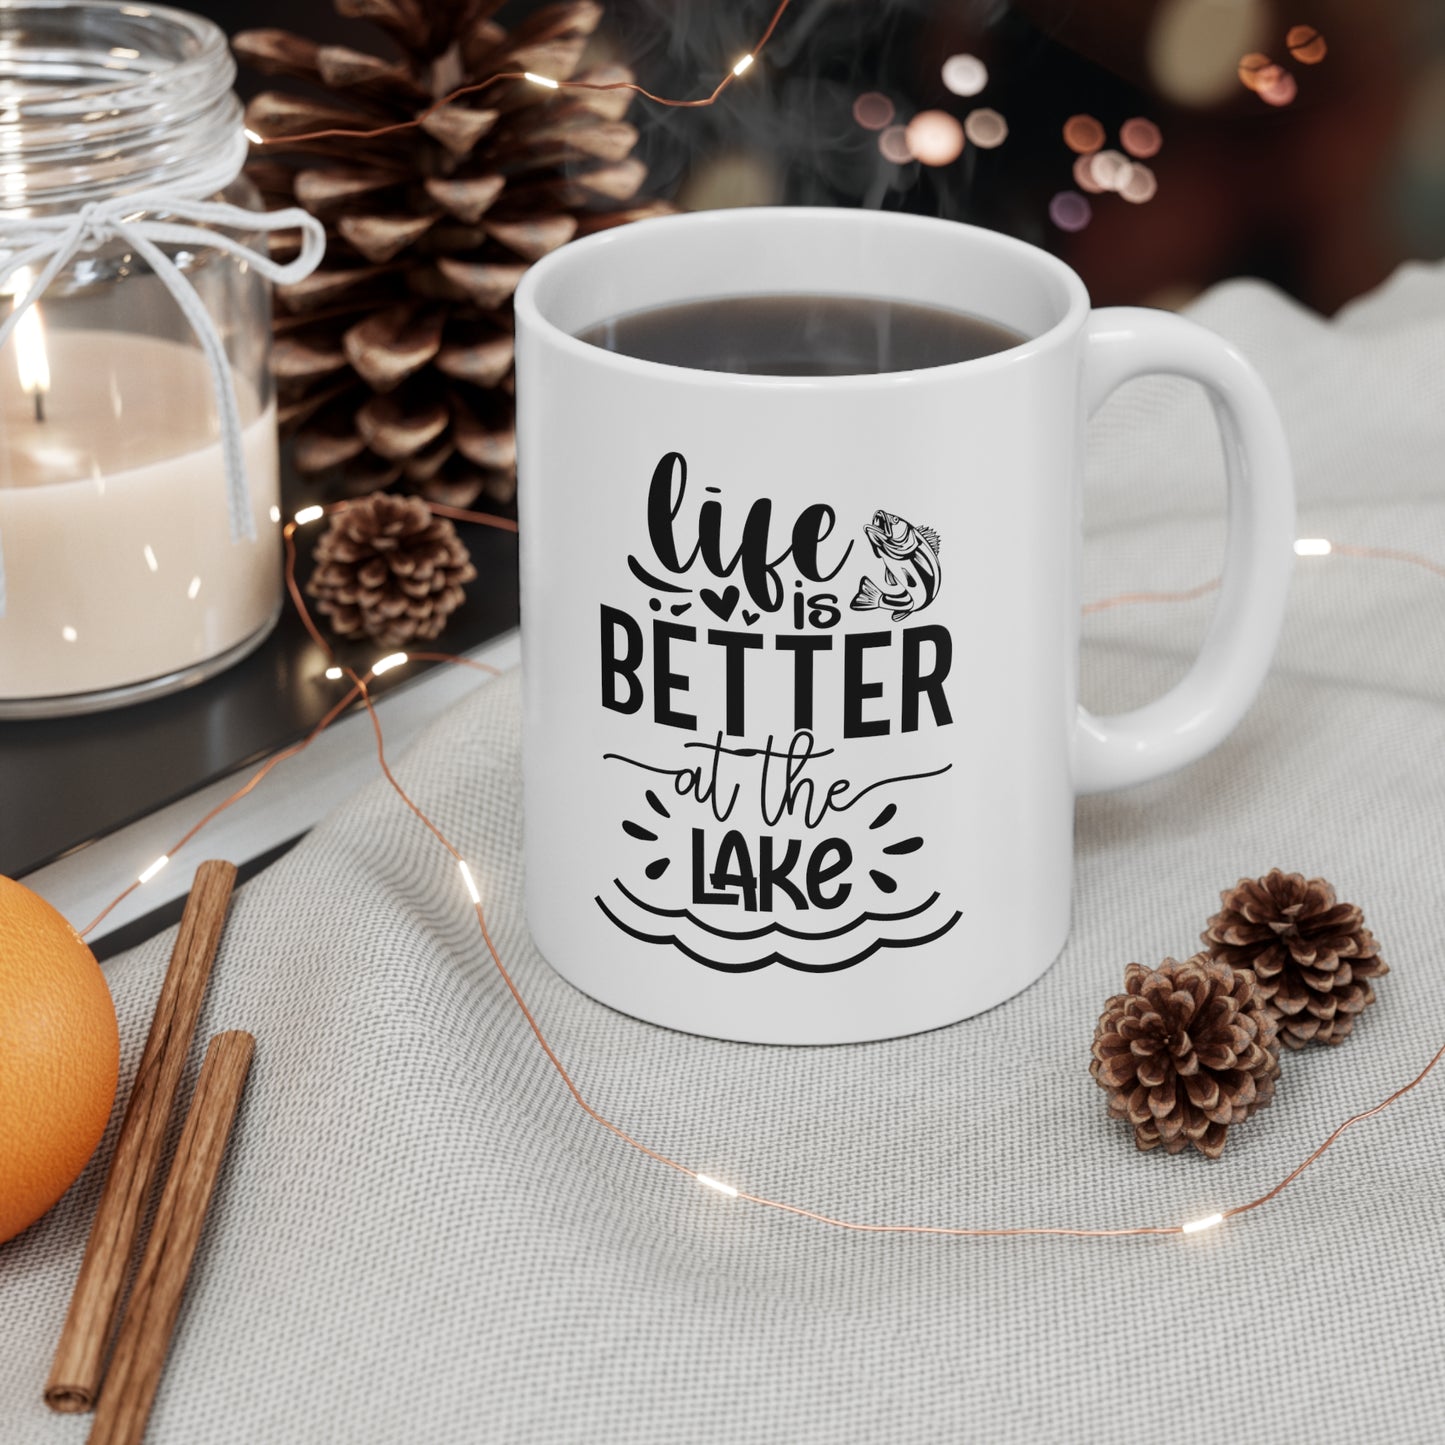 Ceramic mug with "Life Is Better At The Lake" mantra